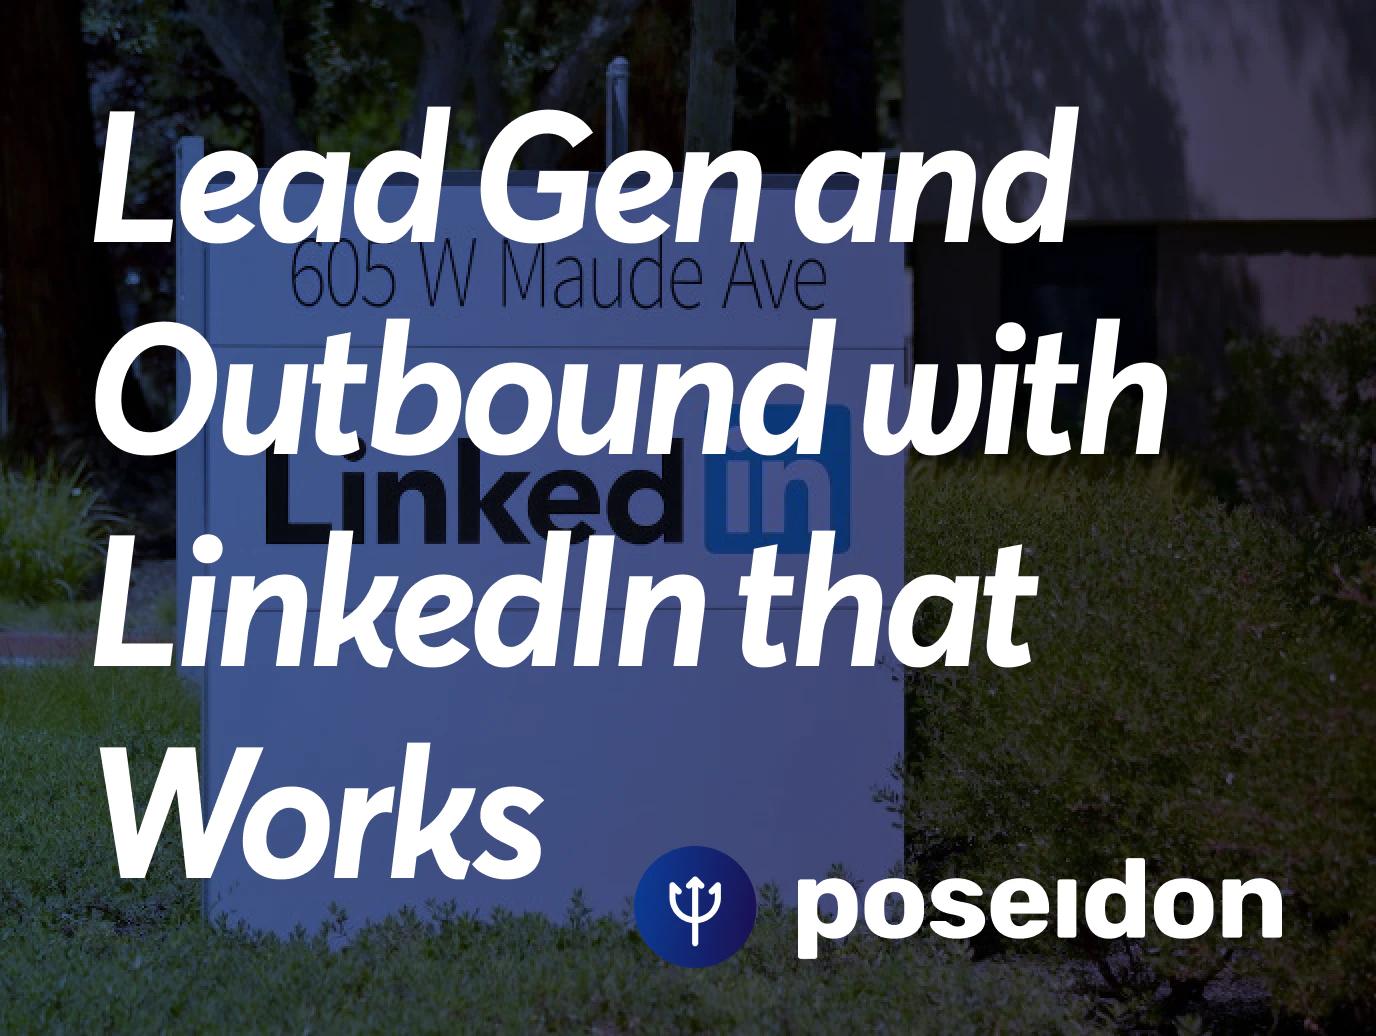 LinkedIn Outbound Sales and Lead Generation that Work